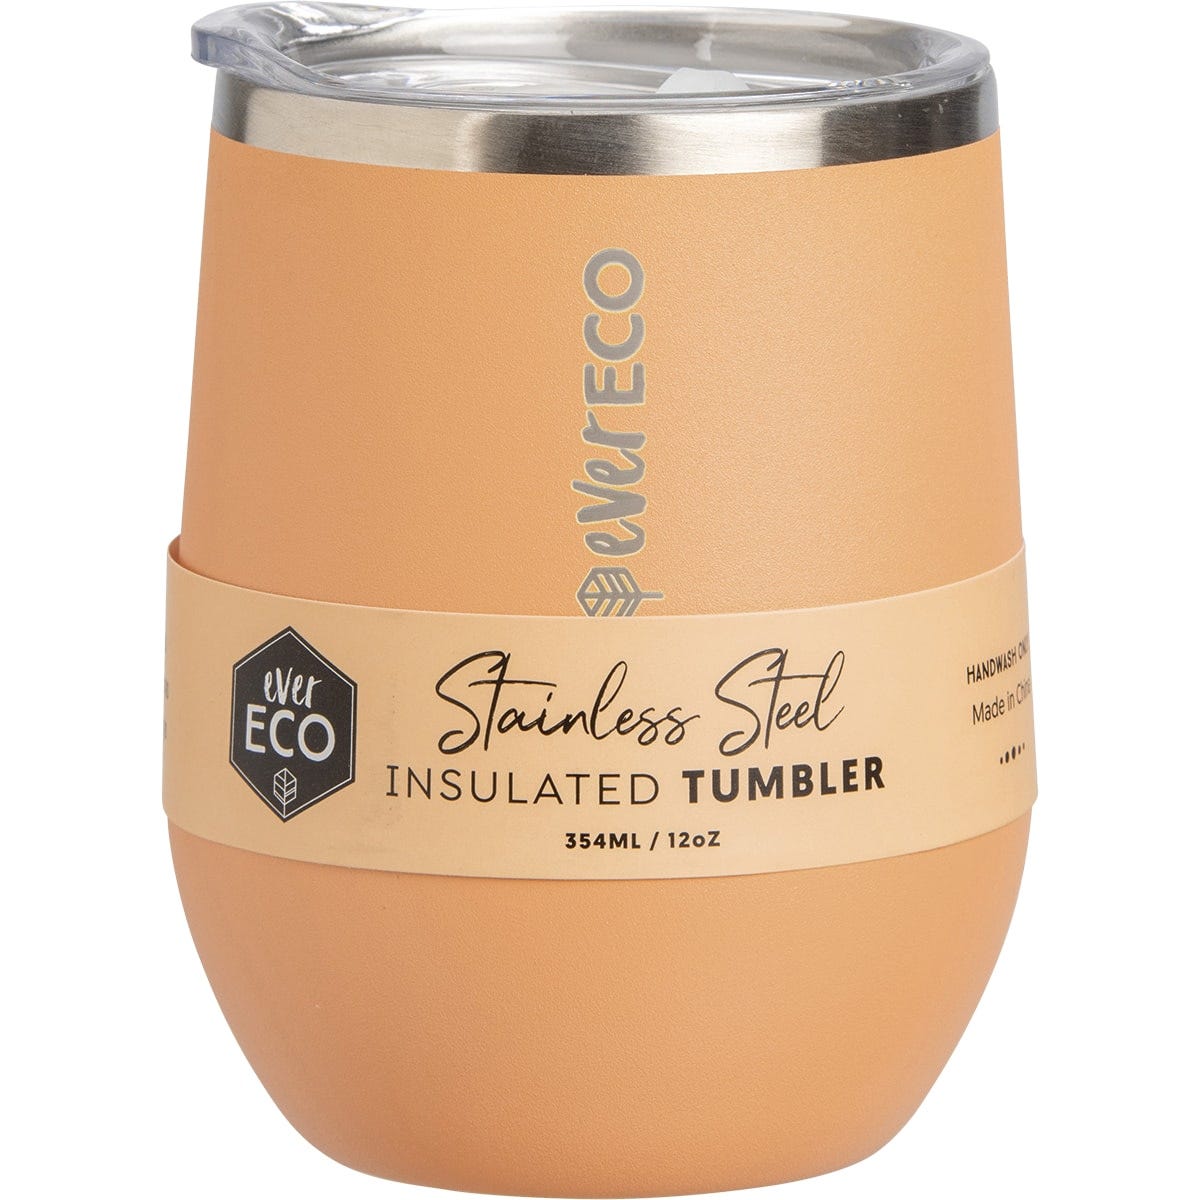 Ever Eco Insulated Tumbler Los Angeles Peach 354ml - Dr Earth - Cups & Tumblers